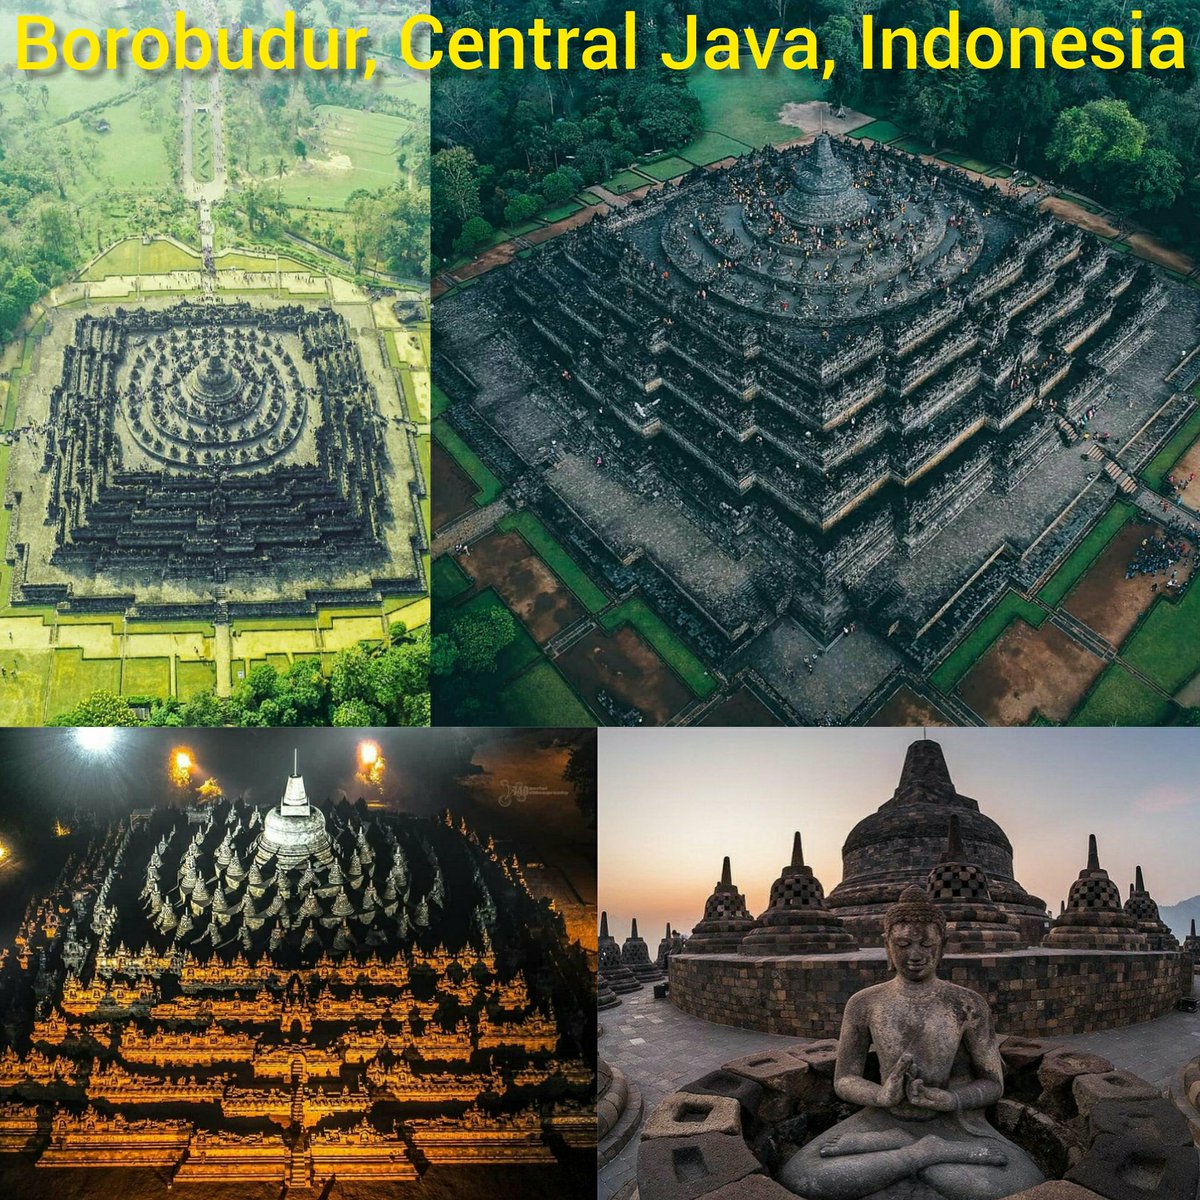 5) #Borobudur, central Java, Indonesia is a Buddhist stupa in the Mahayana tradition and it is the largest Buddhist monument in the world. It was Built in the 9th CE during the reign of the 'Sailendra Dynasty' and was heavily influenced by the ancient indian 'Gupta' era art.